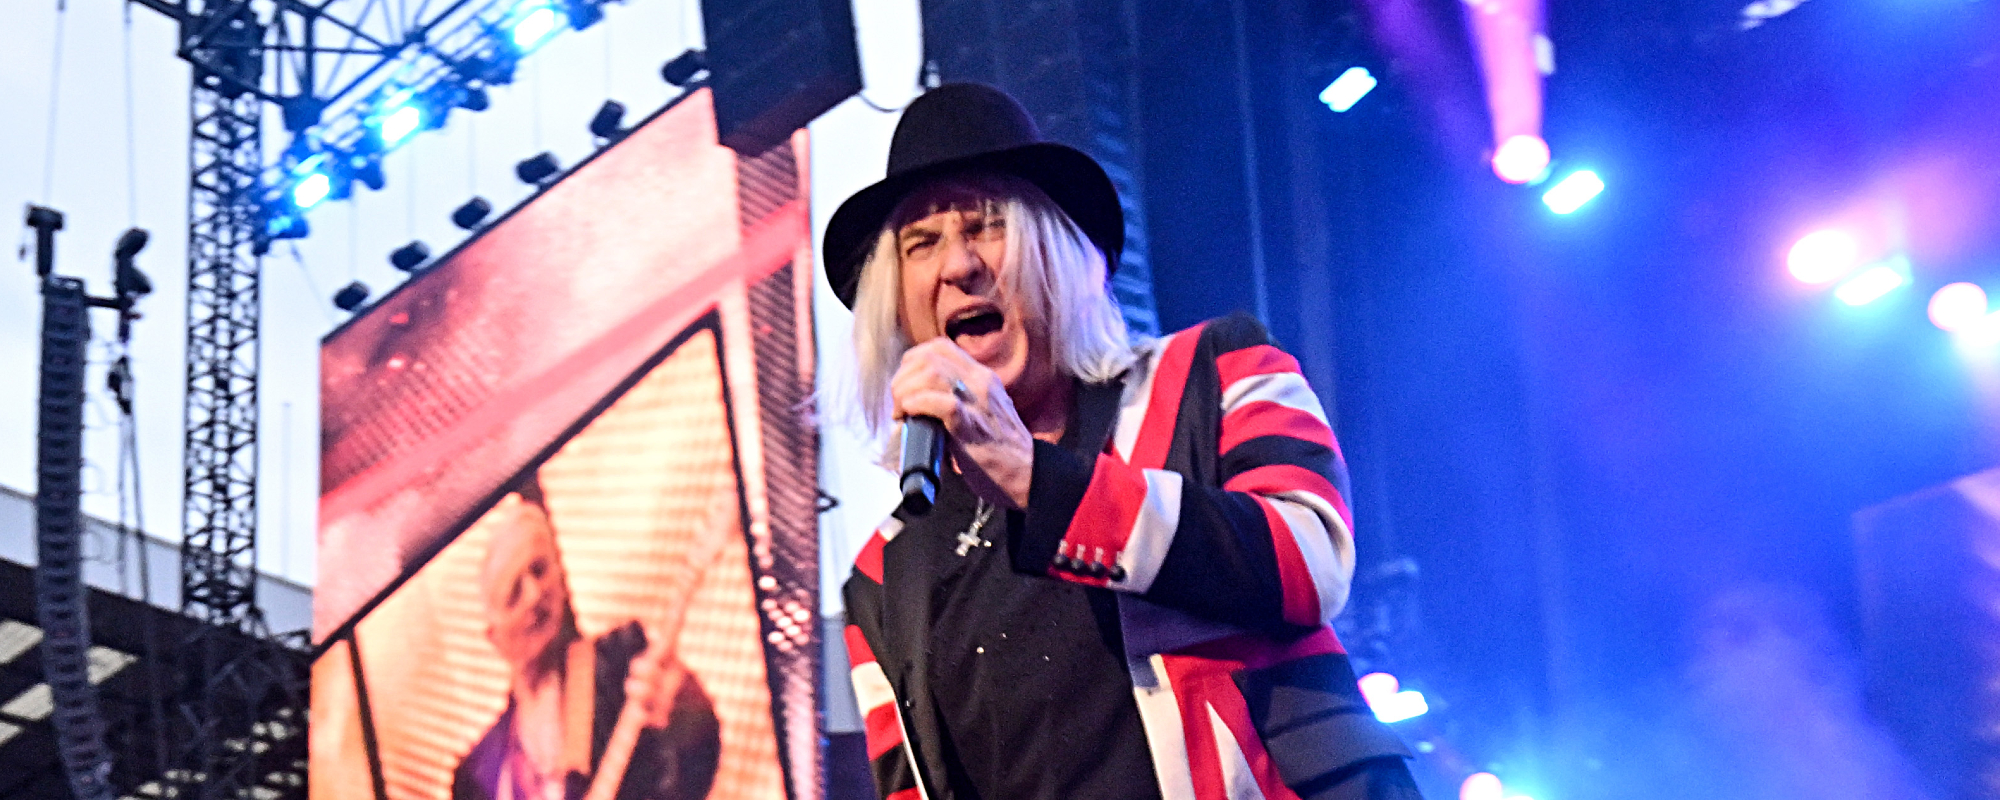 Def Leppard's Joe Elliott Explains How a Hole in the Wall Led to the Hit Song "Photograph"